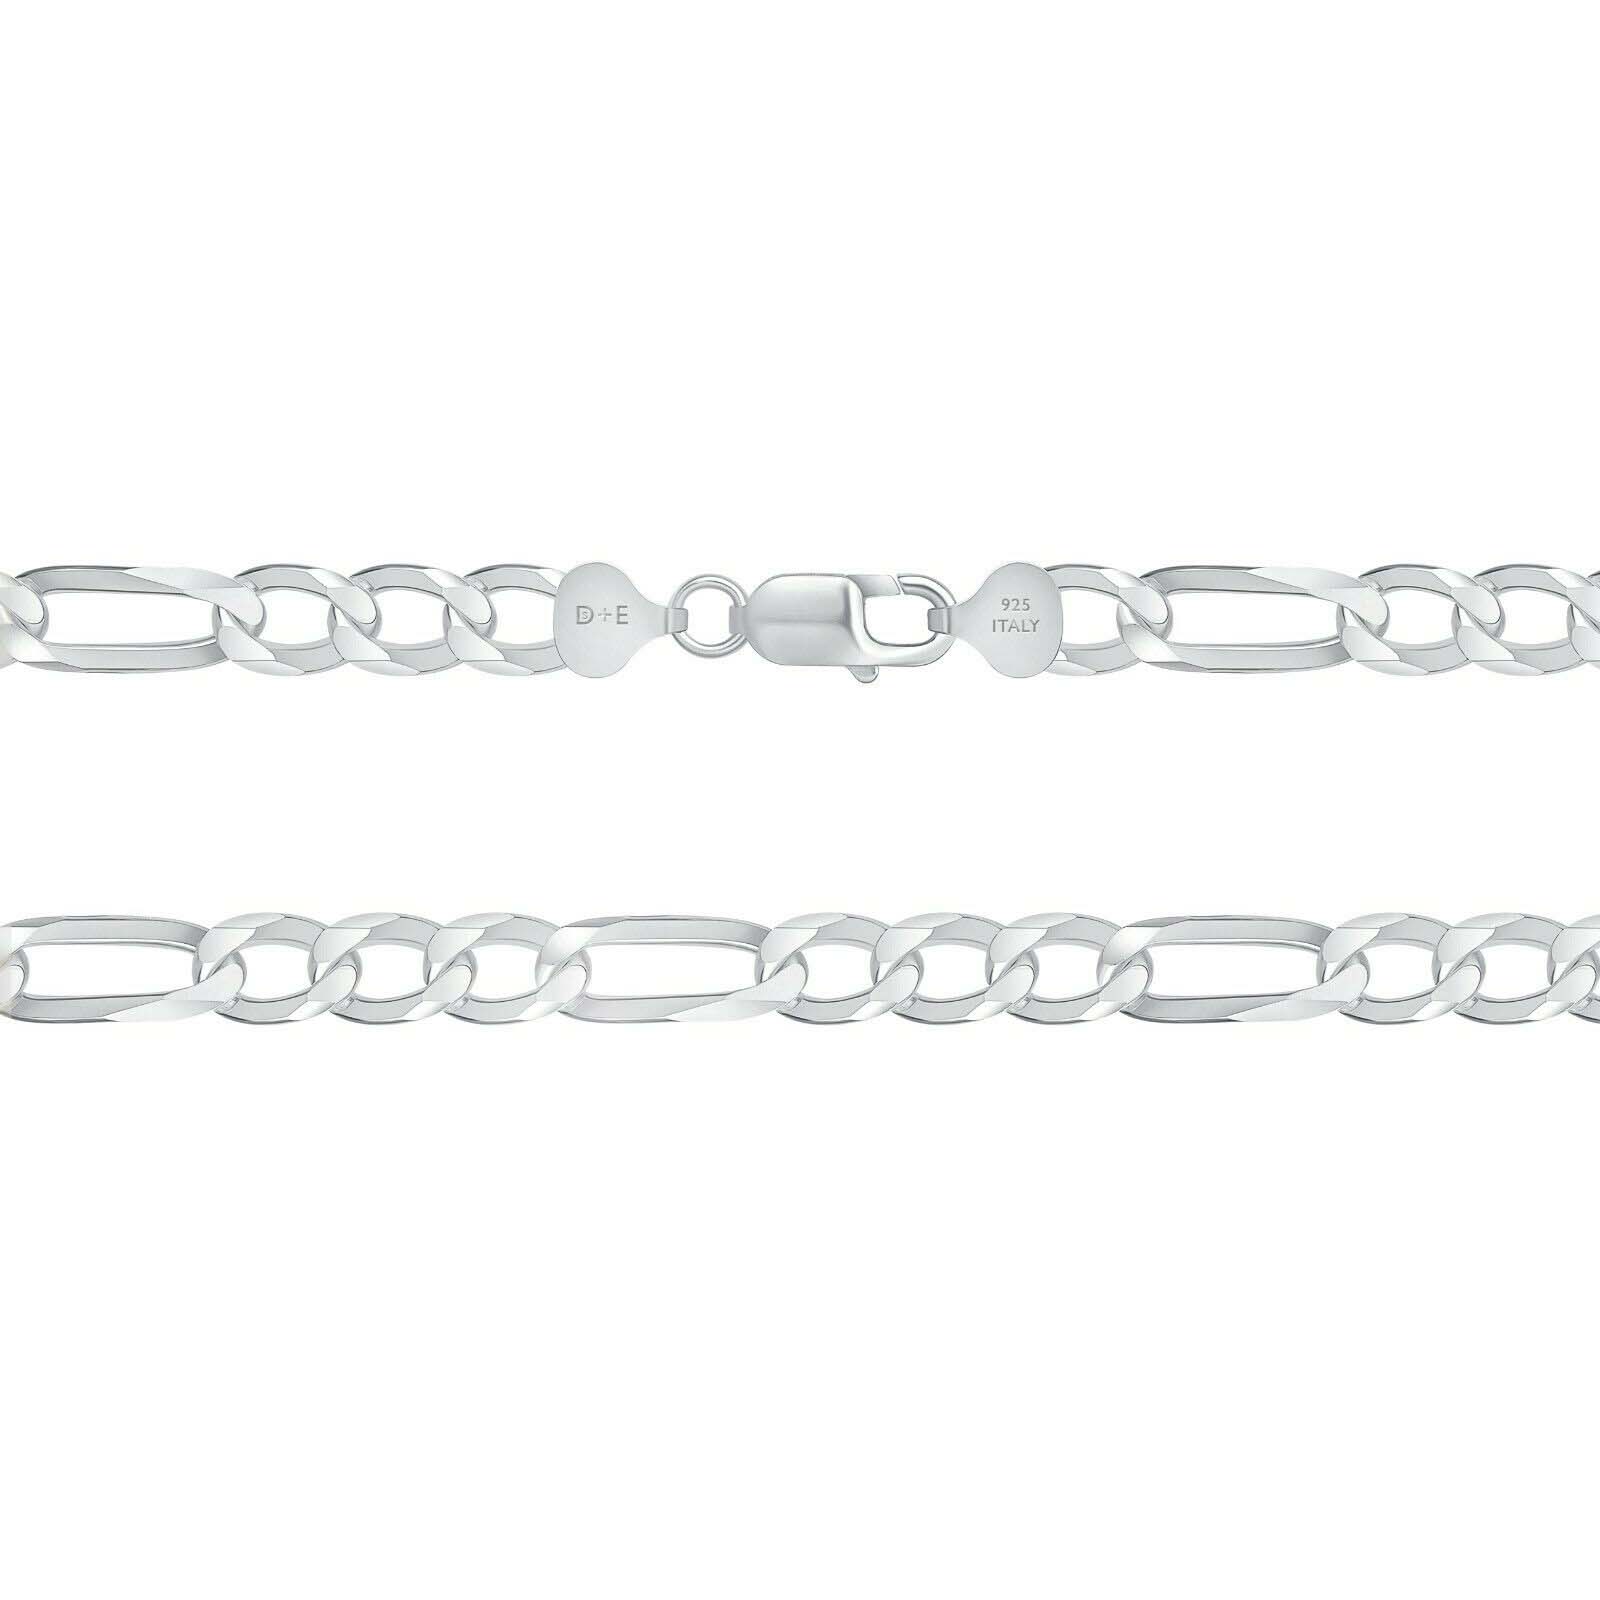 Details about  / Figaro 250-10mm Chain Necklace Genuine Sterling Silver 925 Jewelry 26 inch